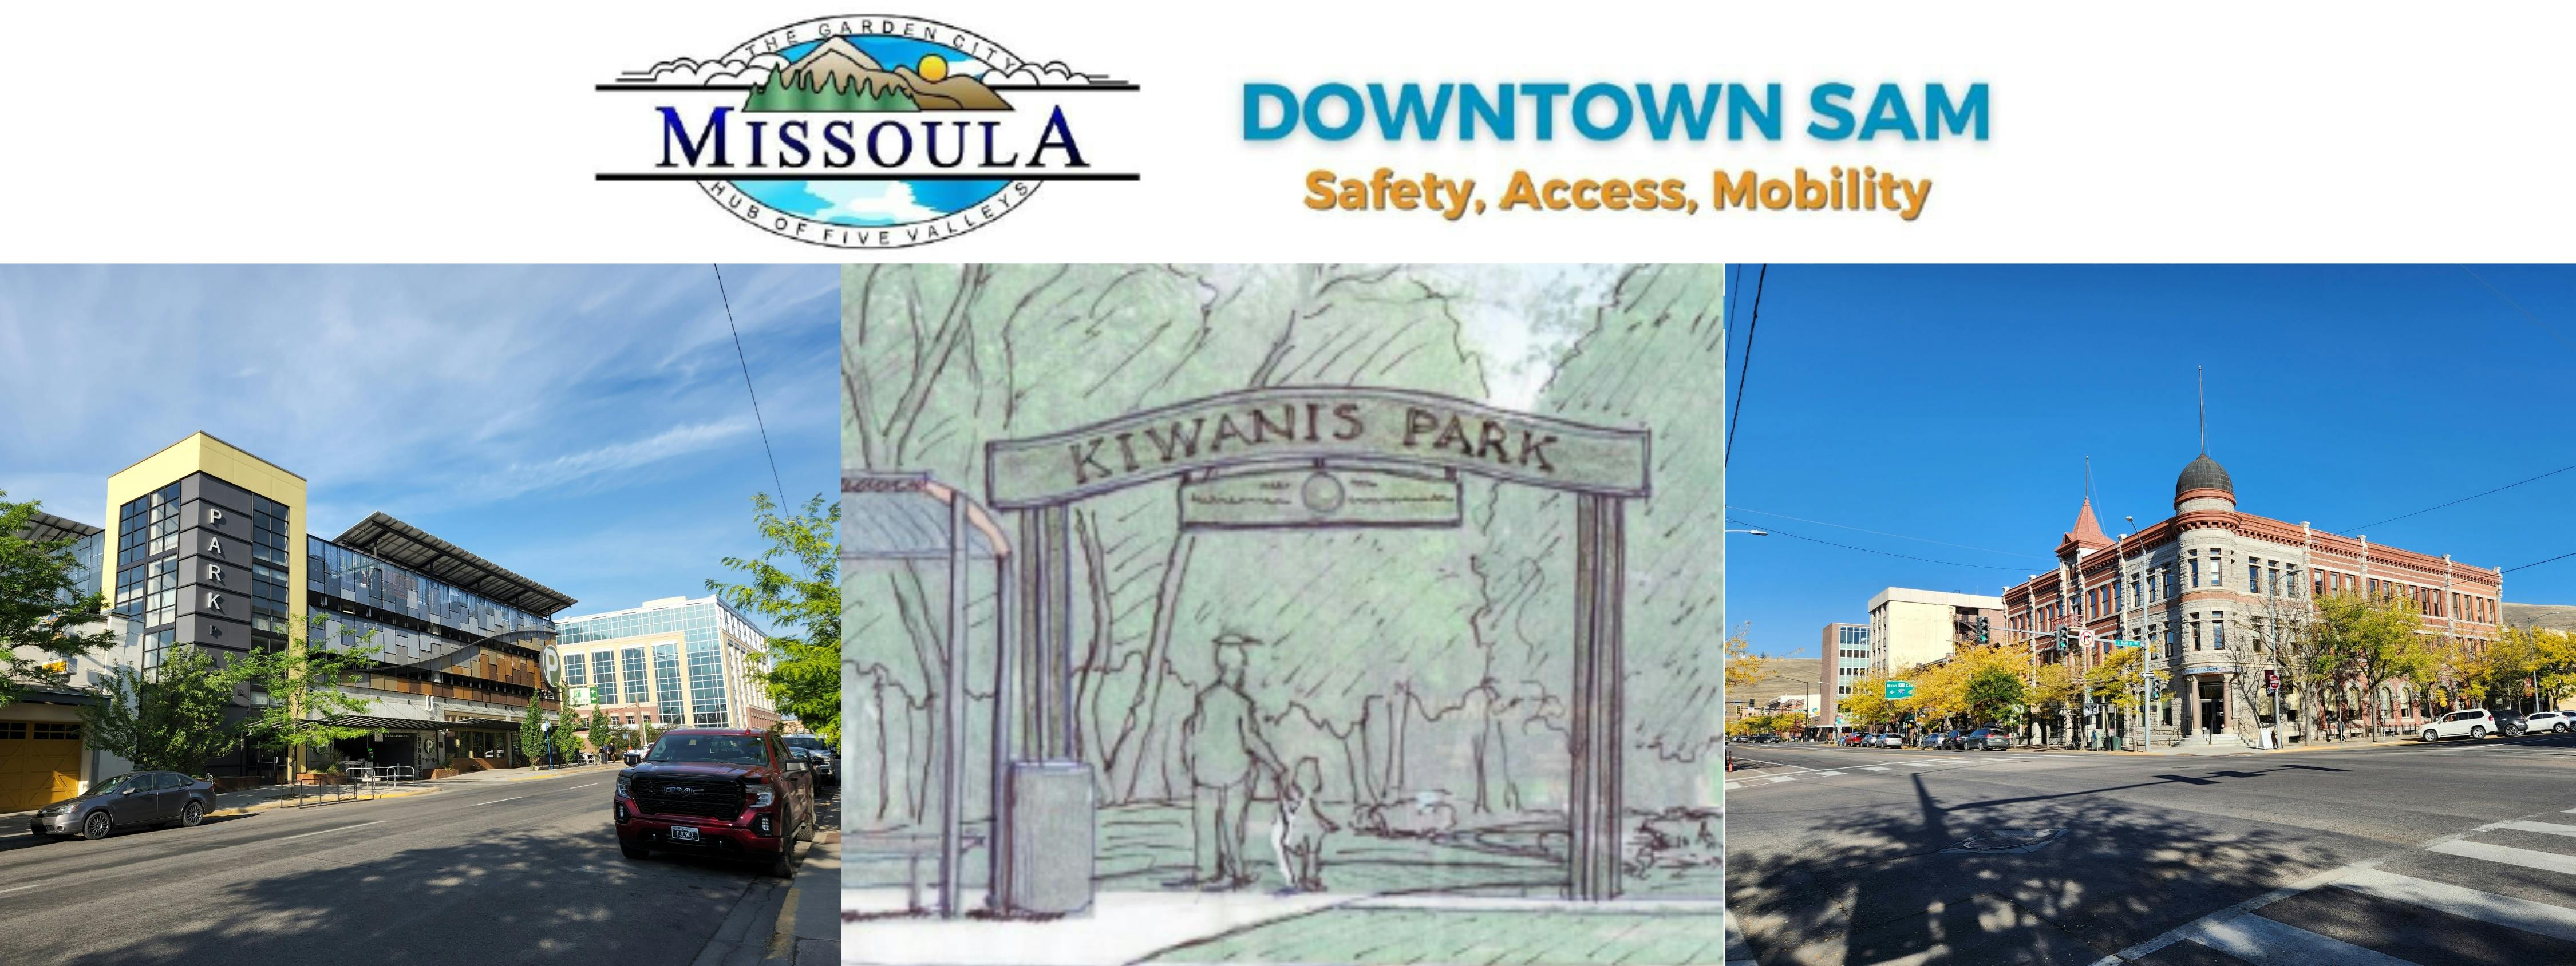 City of Missoula logo & text says Downtown SAM Safety, Access, Mobility & images of Front St, Kiwanis Park, and Higgins Ave.